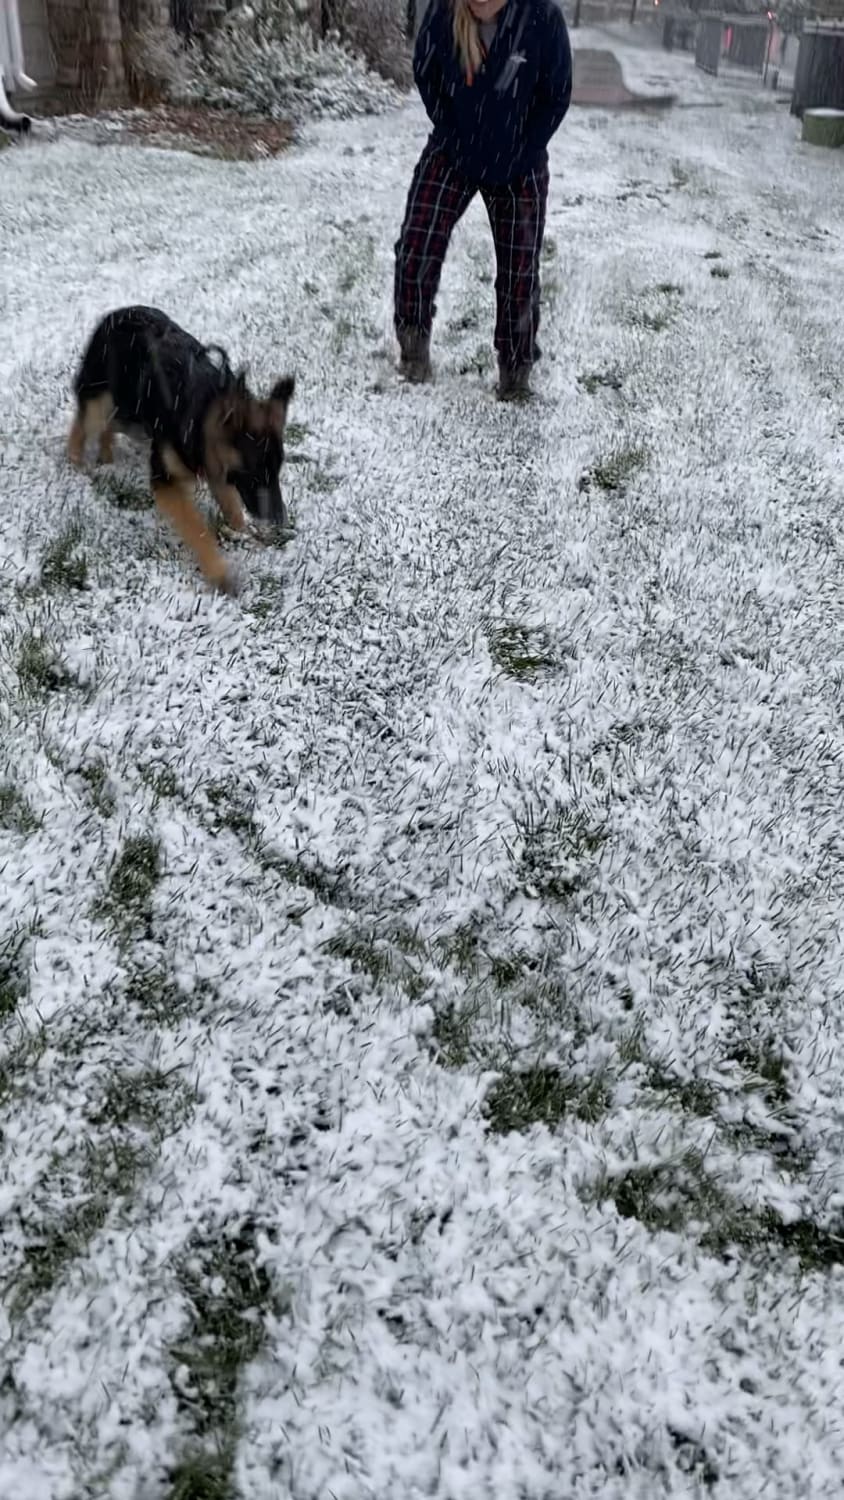 The “first time seeing snow” zoomies!